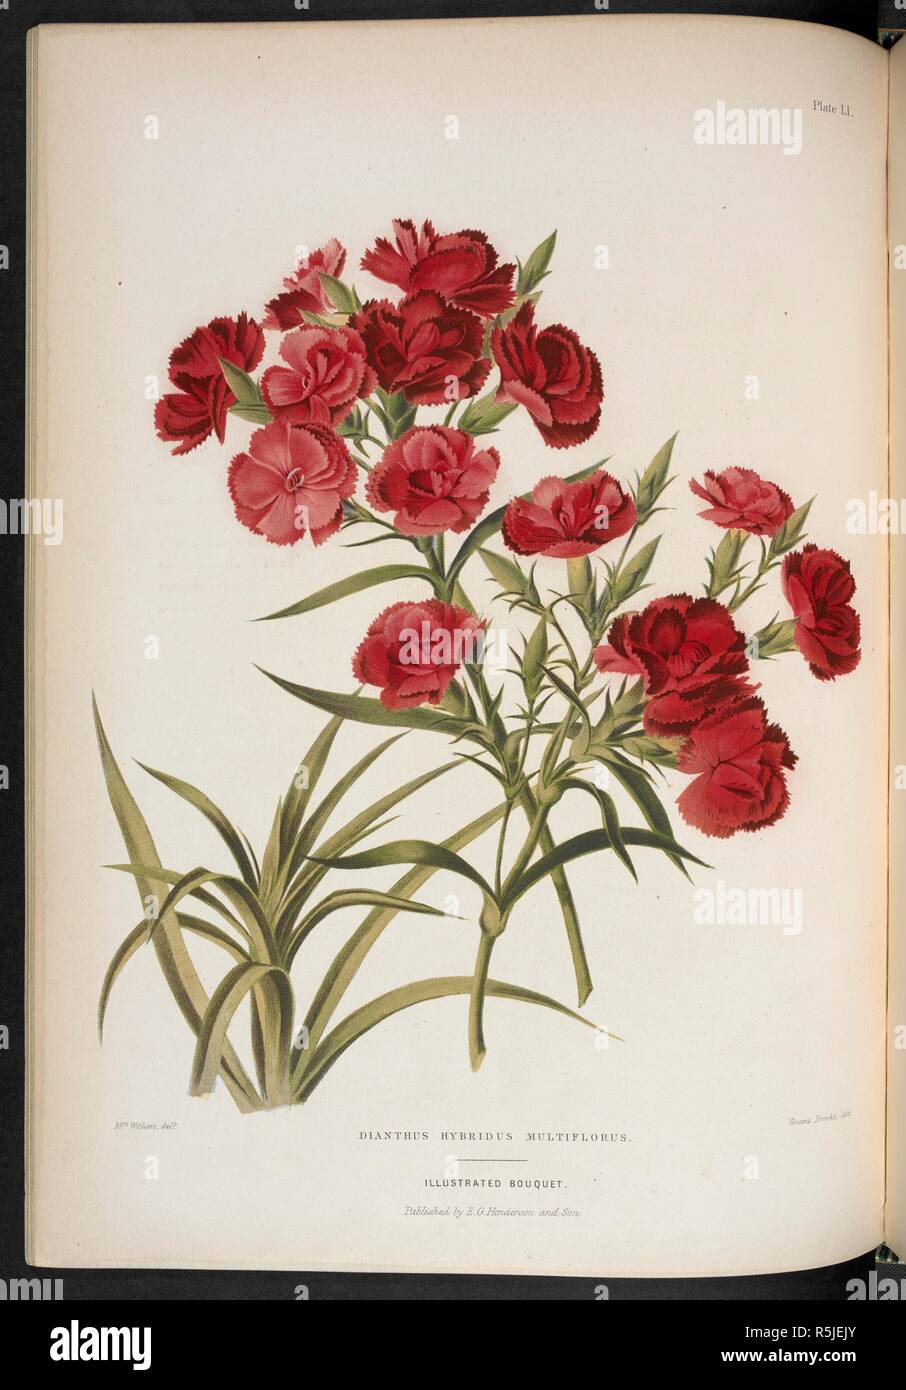 Dianthus Hybridus Multiflorus. Mule Pink. The Illustrated Bouquet, consisting of figures, with descriptions of new flowers. London, 1857-64. Source: 1823.c.13 plate 51. Author: Henderson, Edward George. Withers, Mrs. Stock Photo